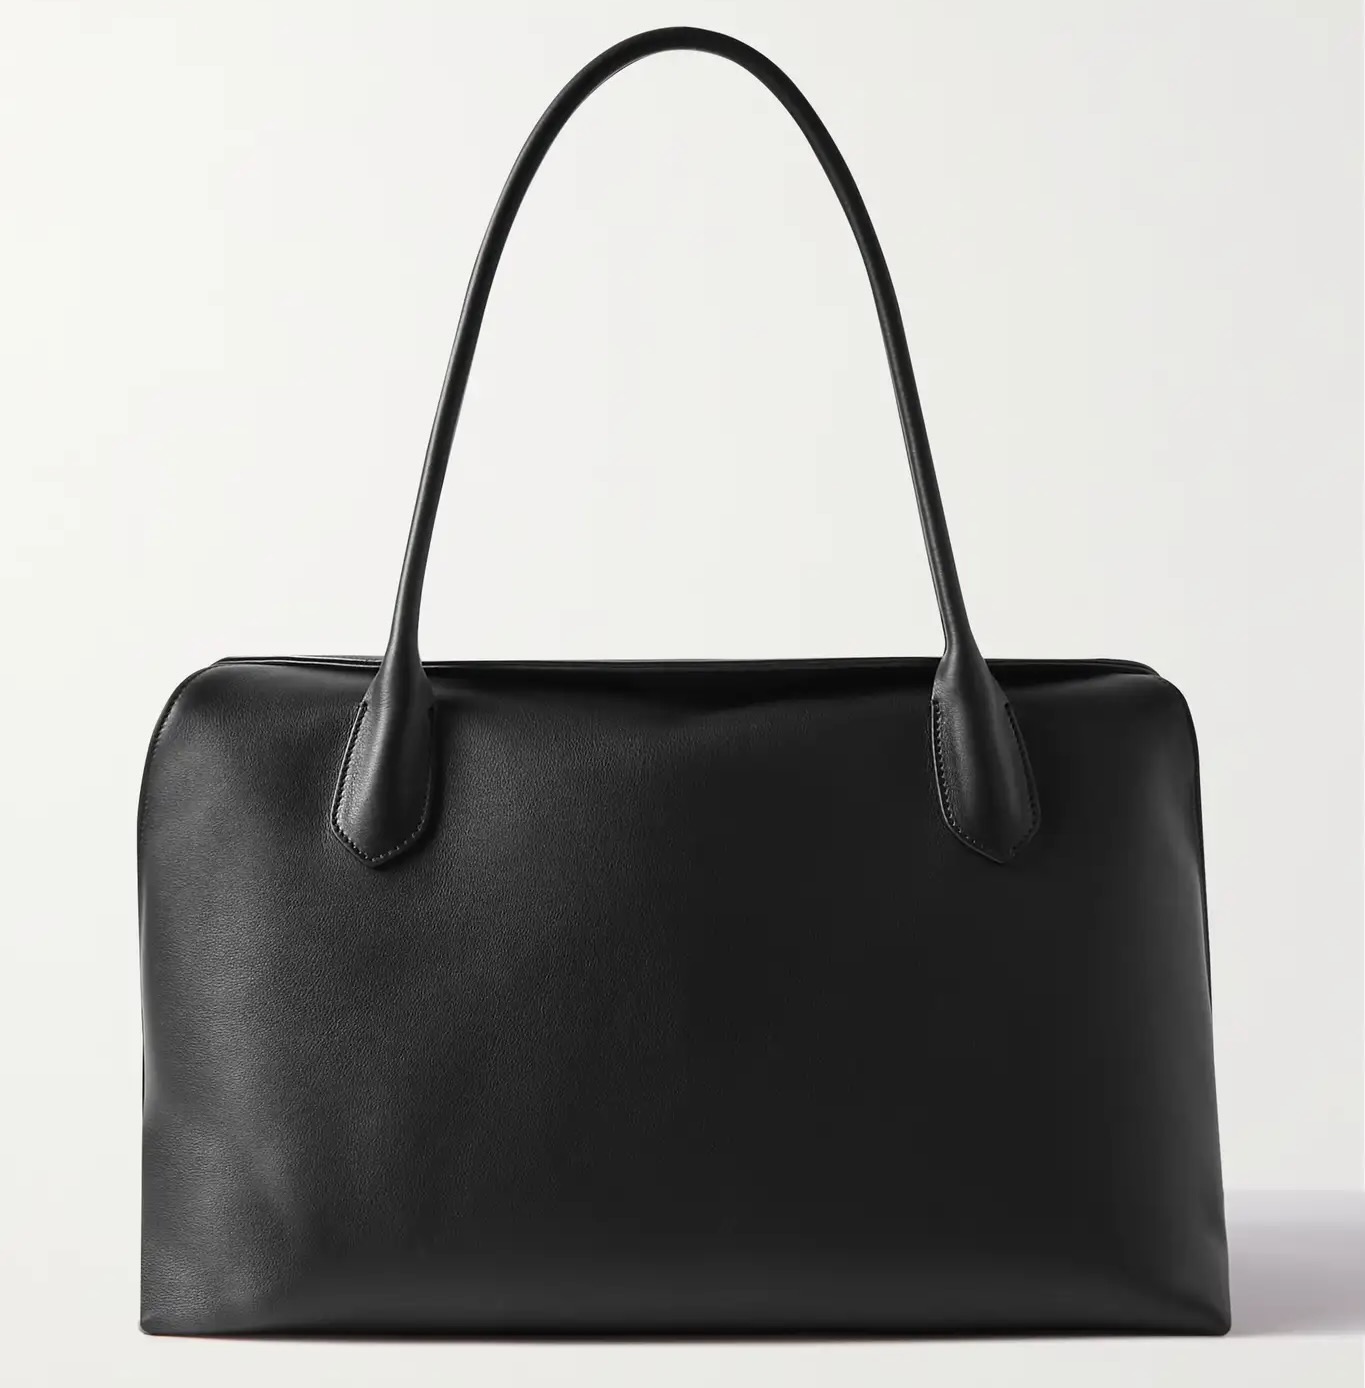 Habitually Chic® » 26 Chic Tote Bags for Fall and Back to Work